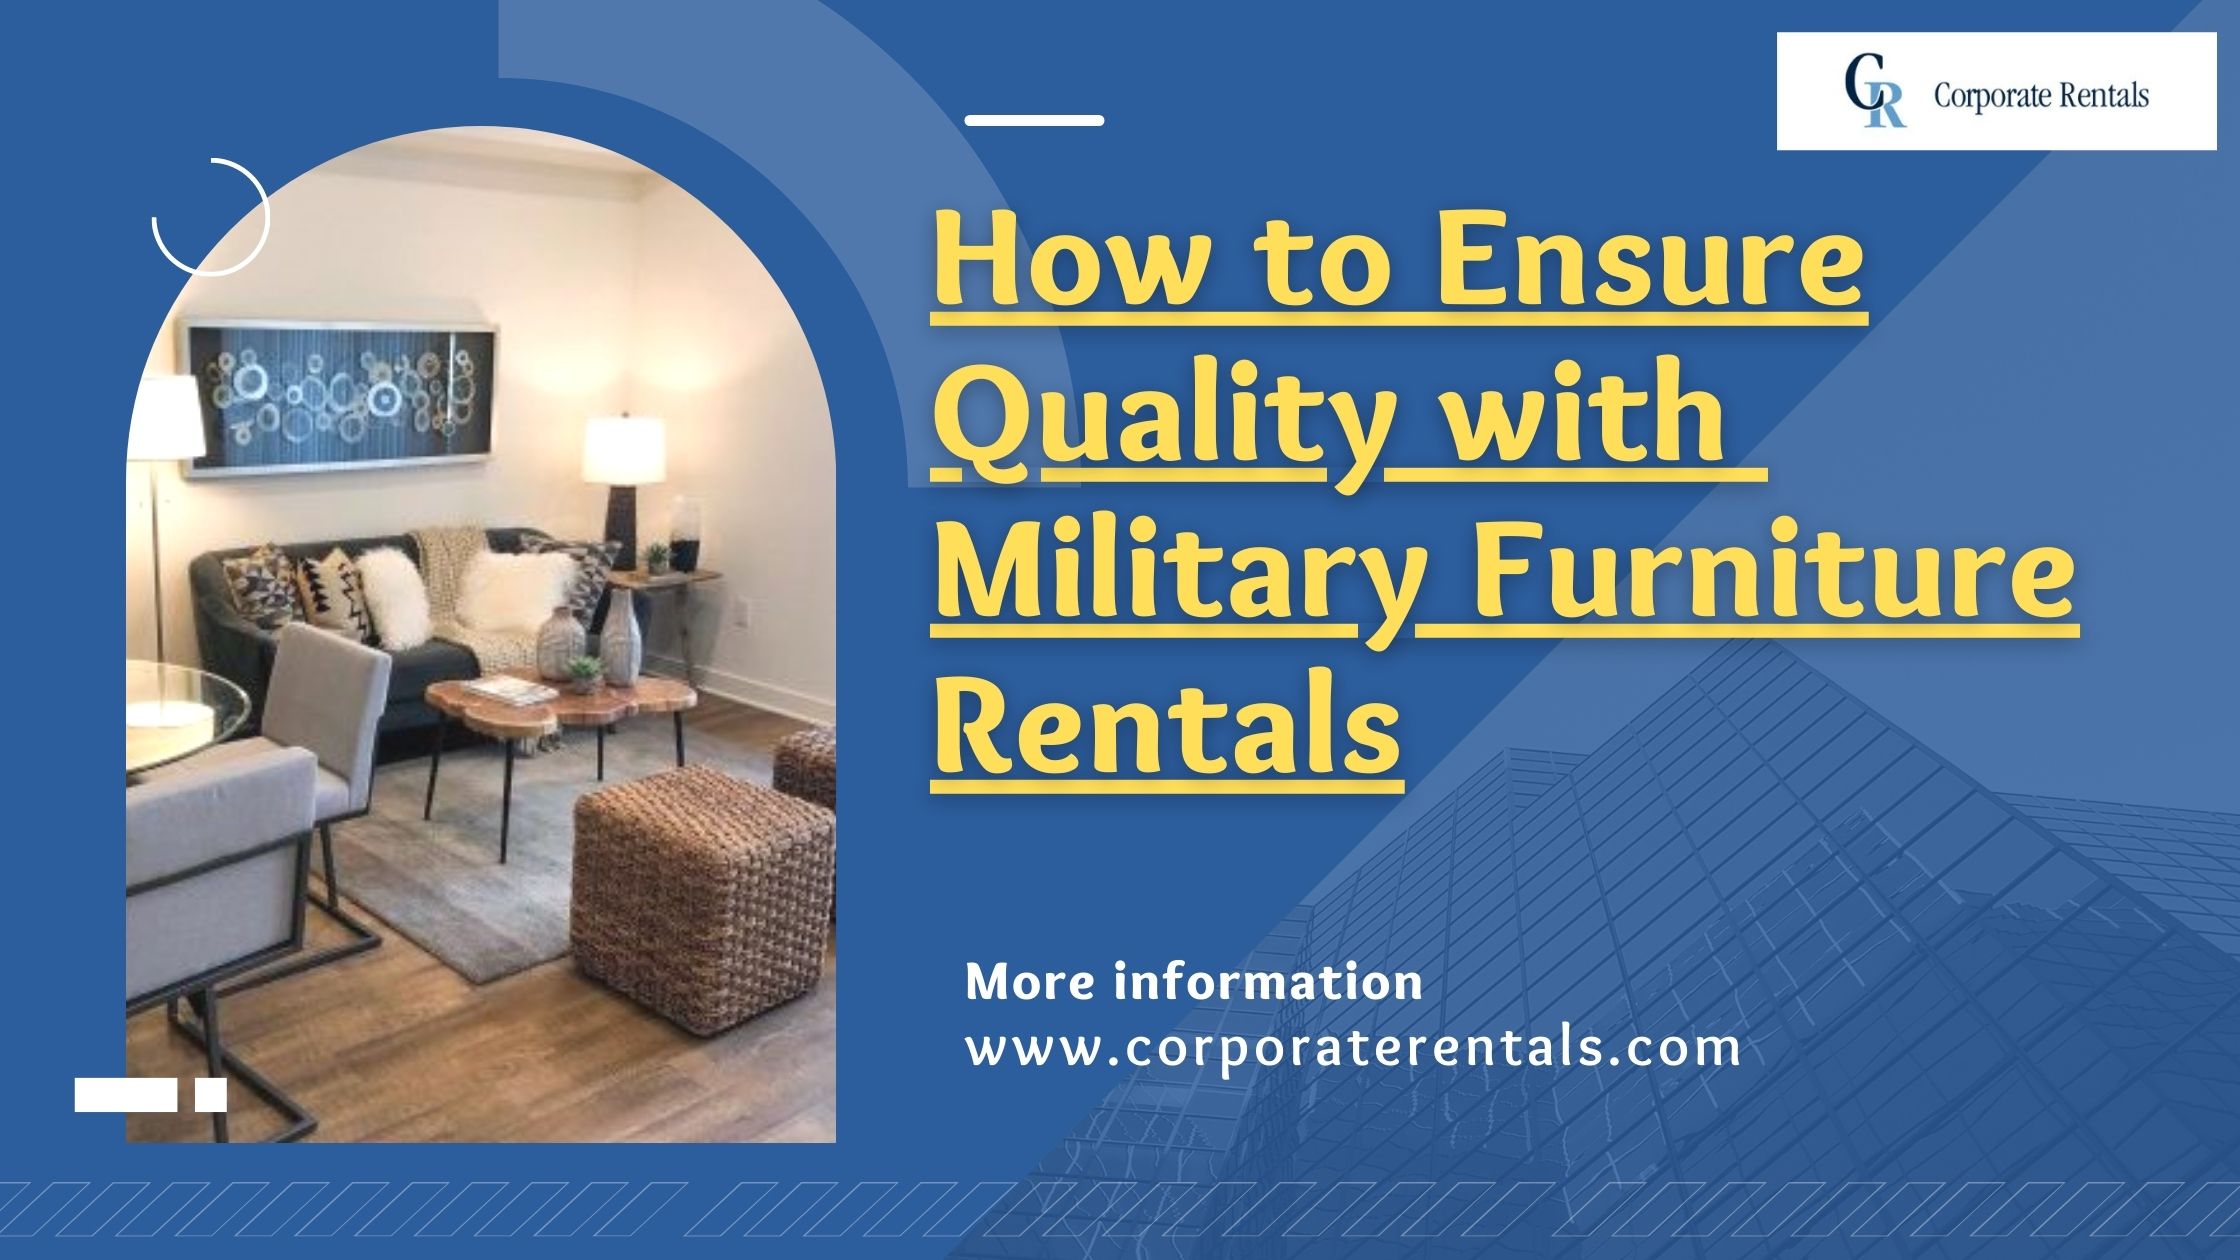 How to Ensure Quality with Military Furniture Rentals